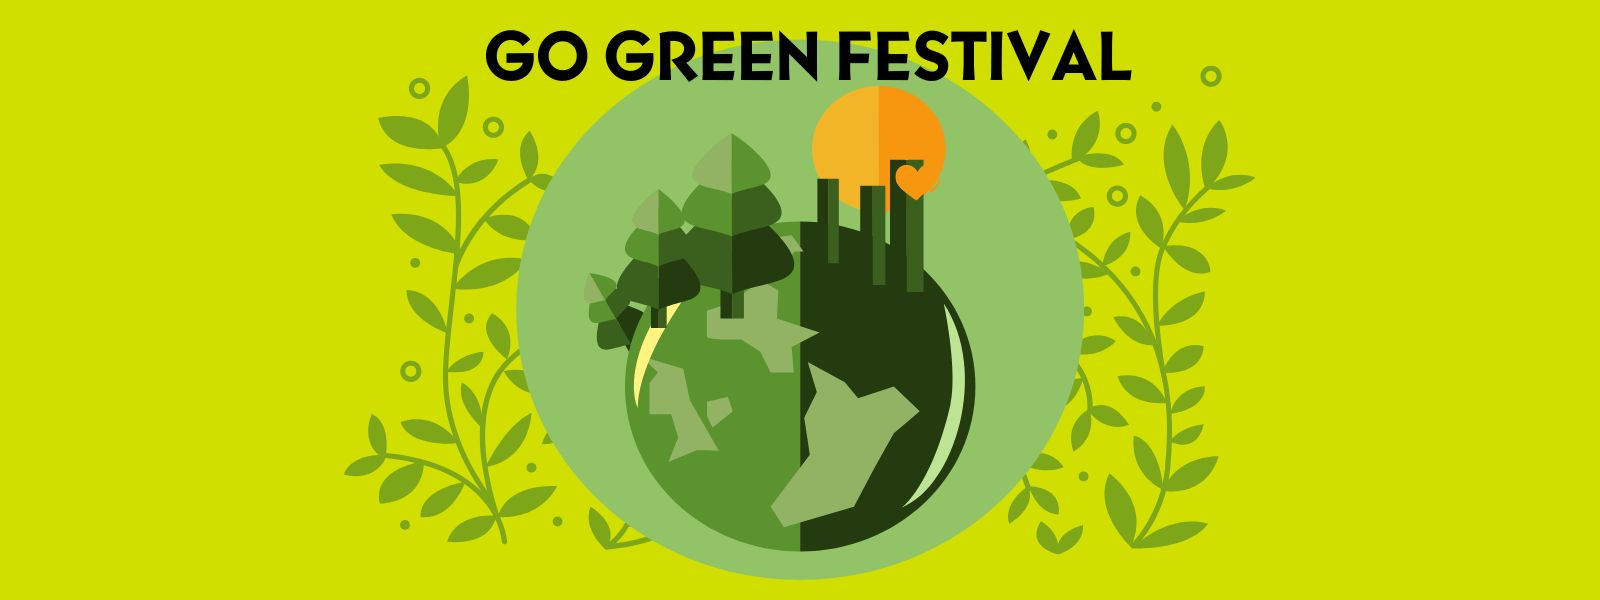 A green poster with text Go Green Festival and a picture of a green globe with trees.